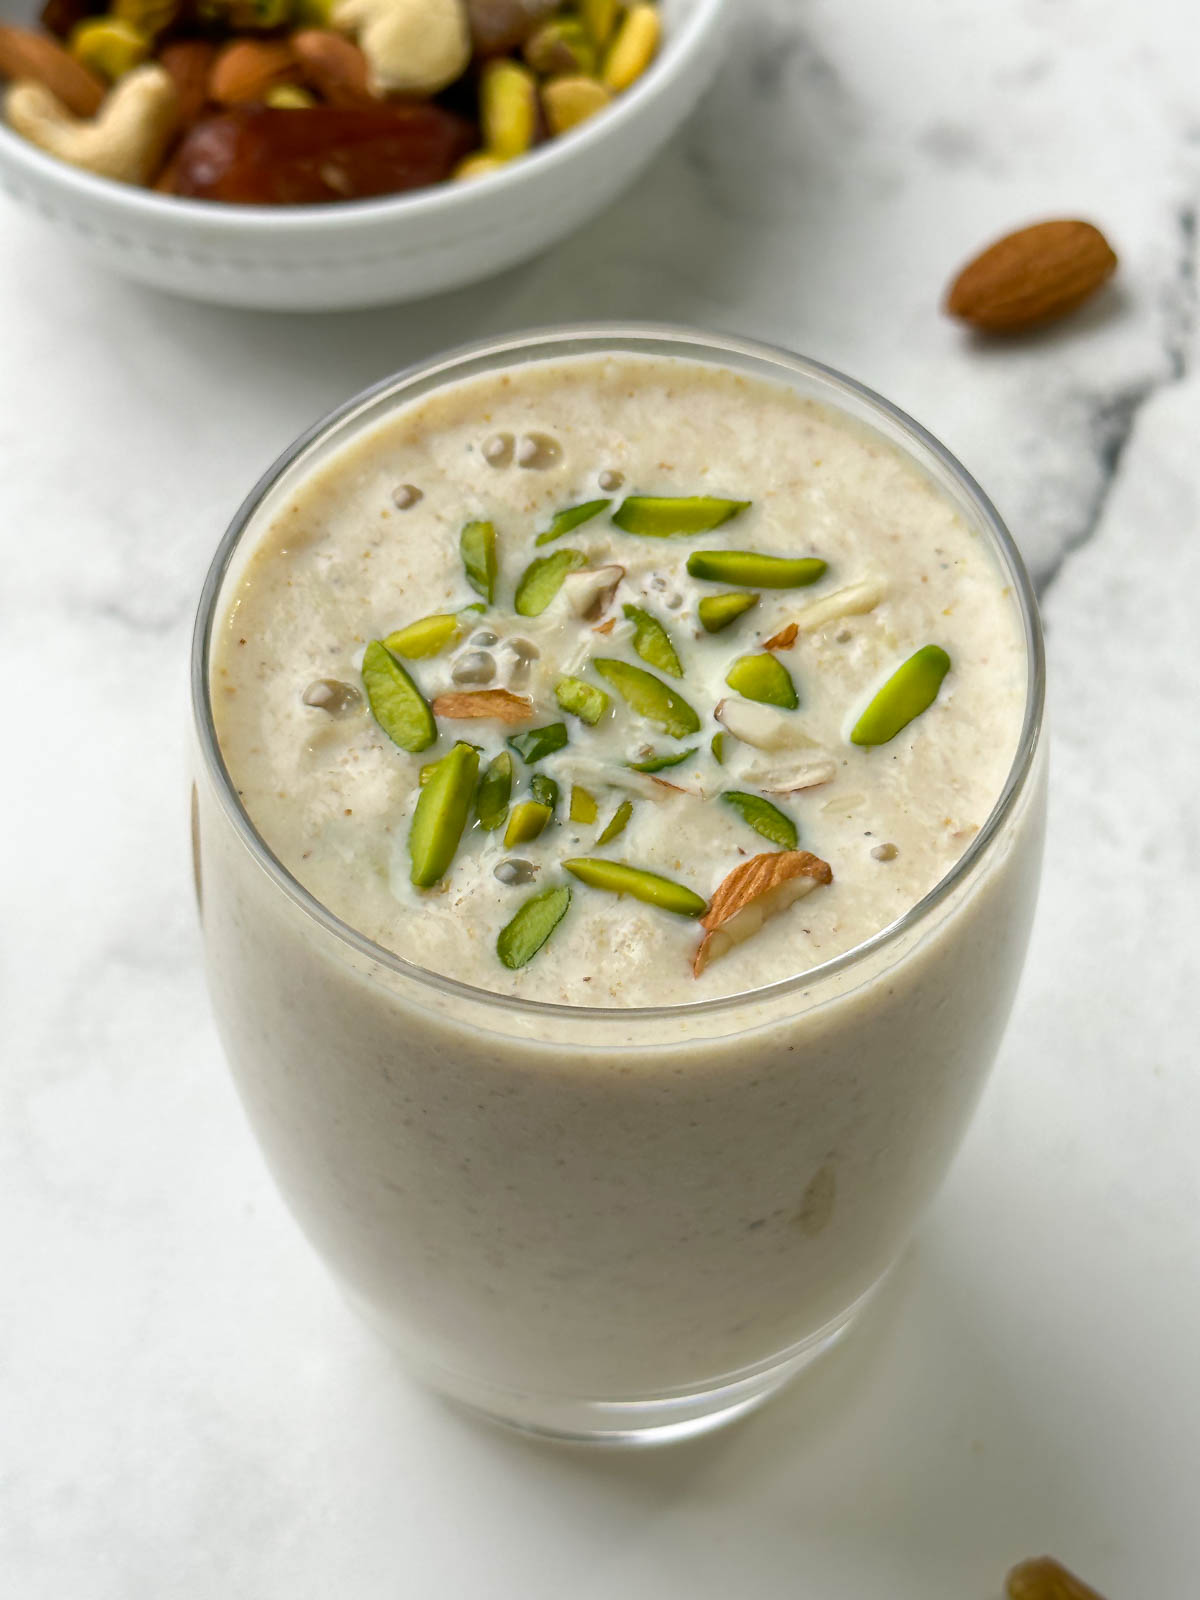 dryfruits milkshake served in a glass garnished with pistachios and mixed dry fruits on the side in a bowl